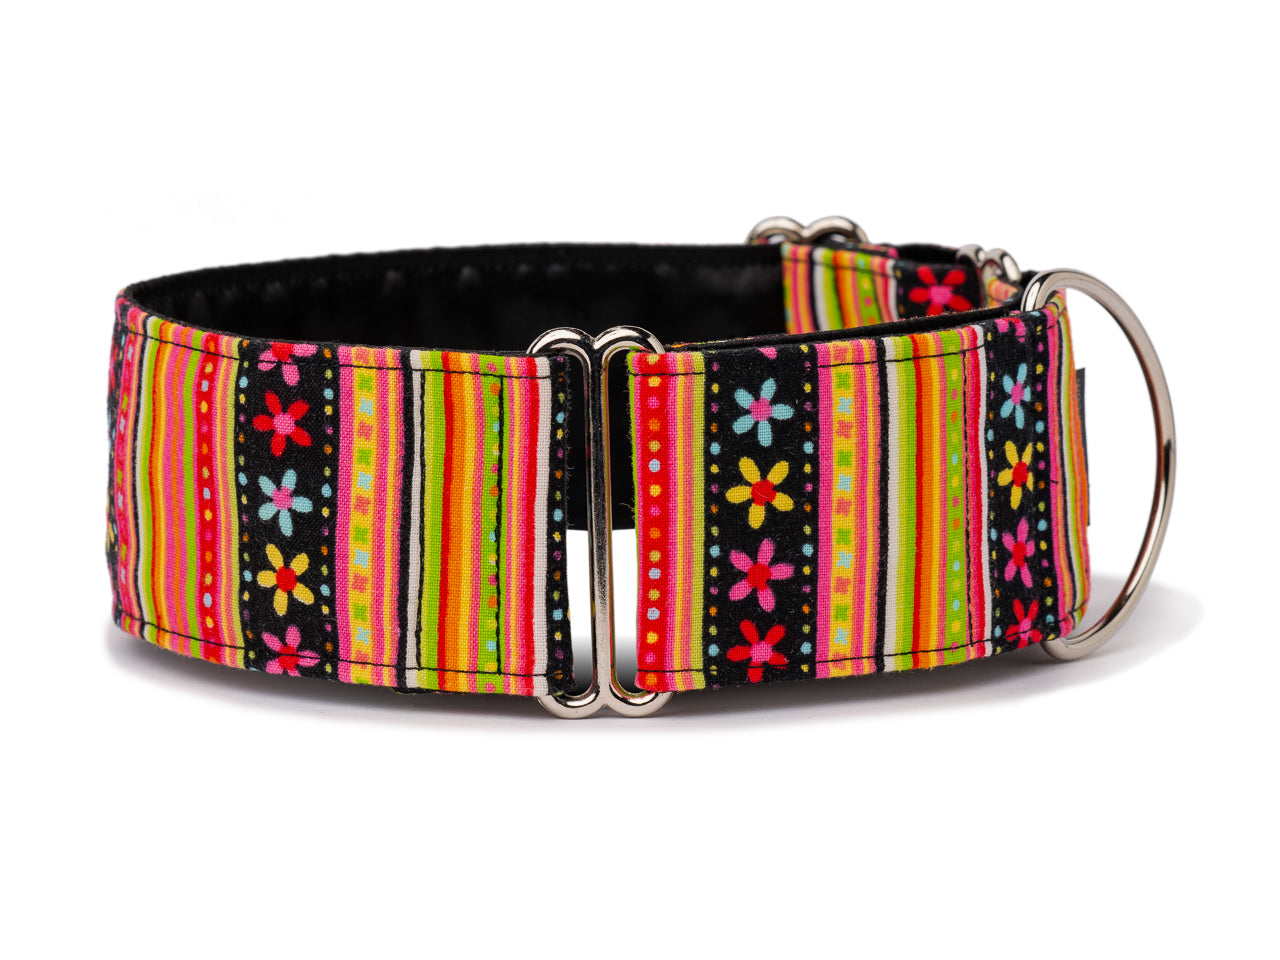 These tiny colorful daisies and stripes are the prettiest accessory for your pretty pooch!